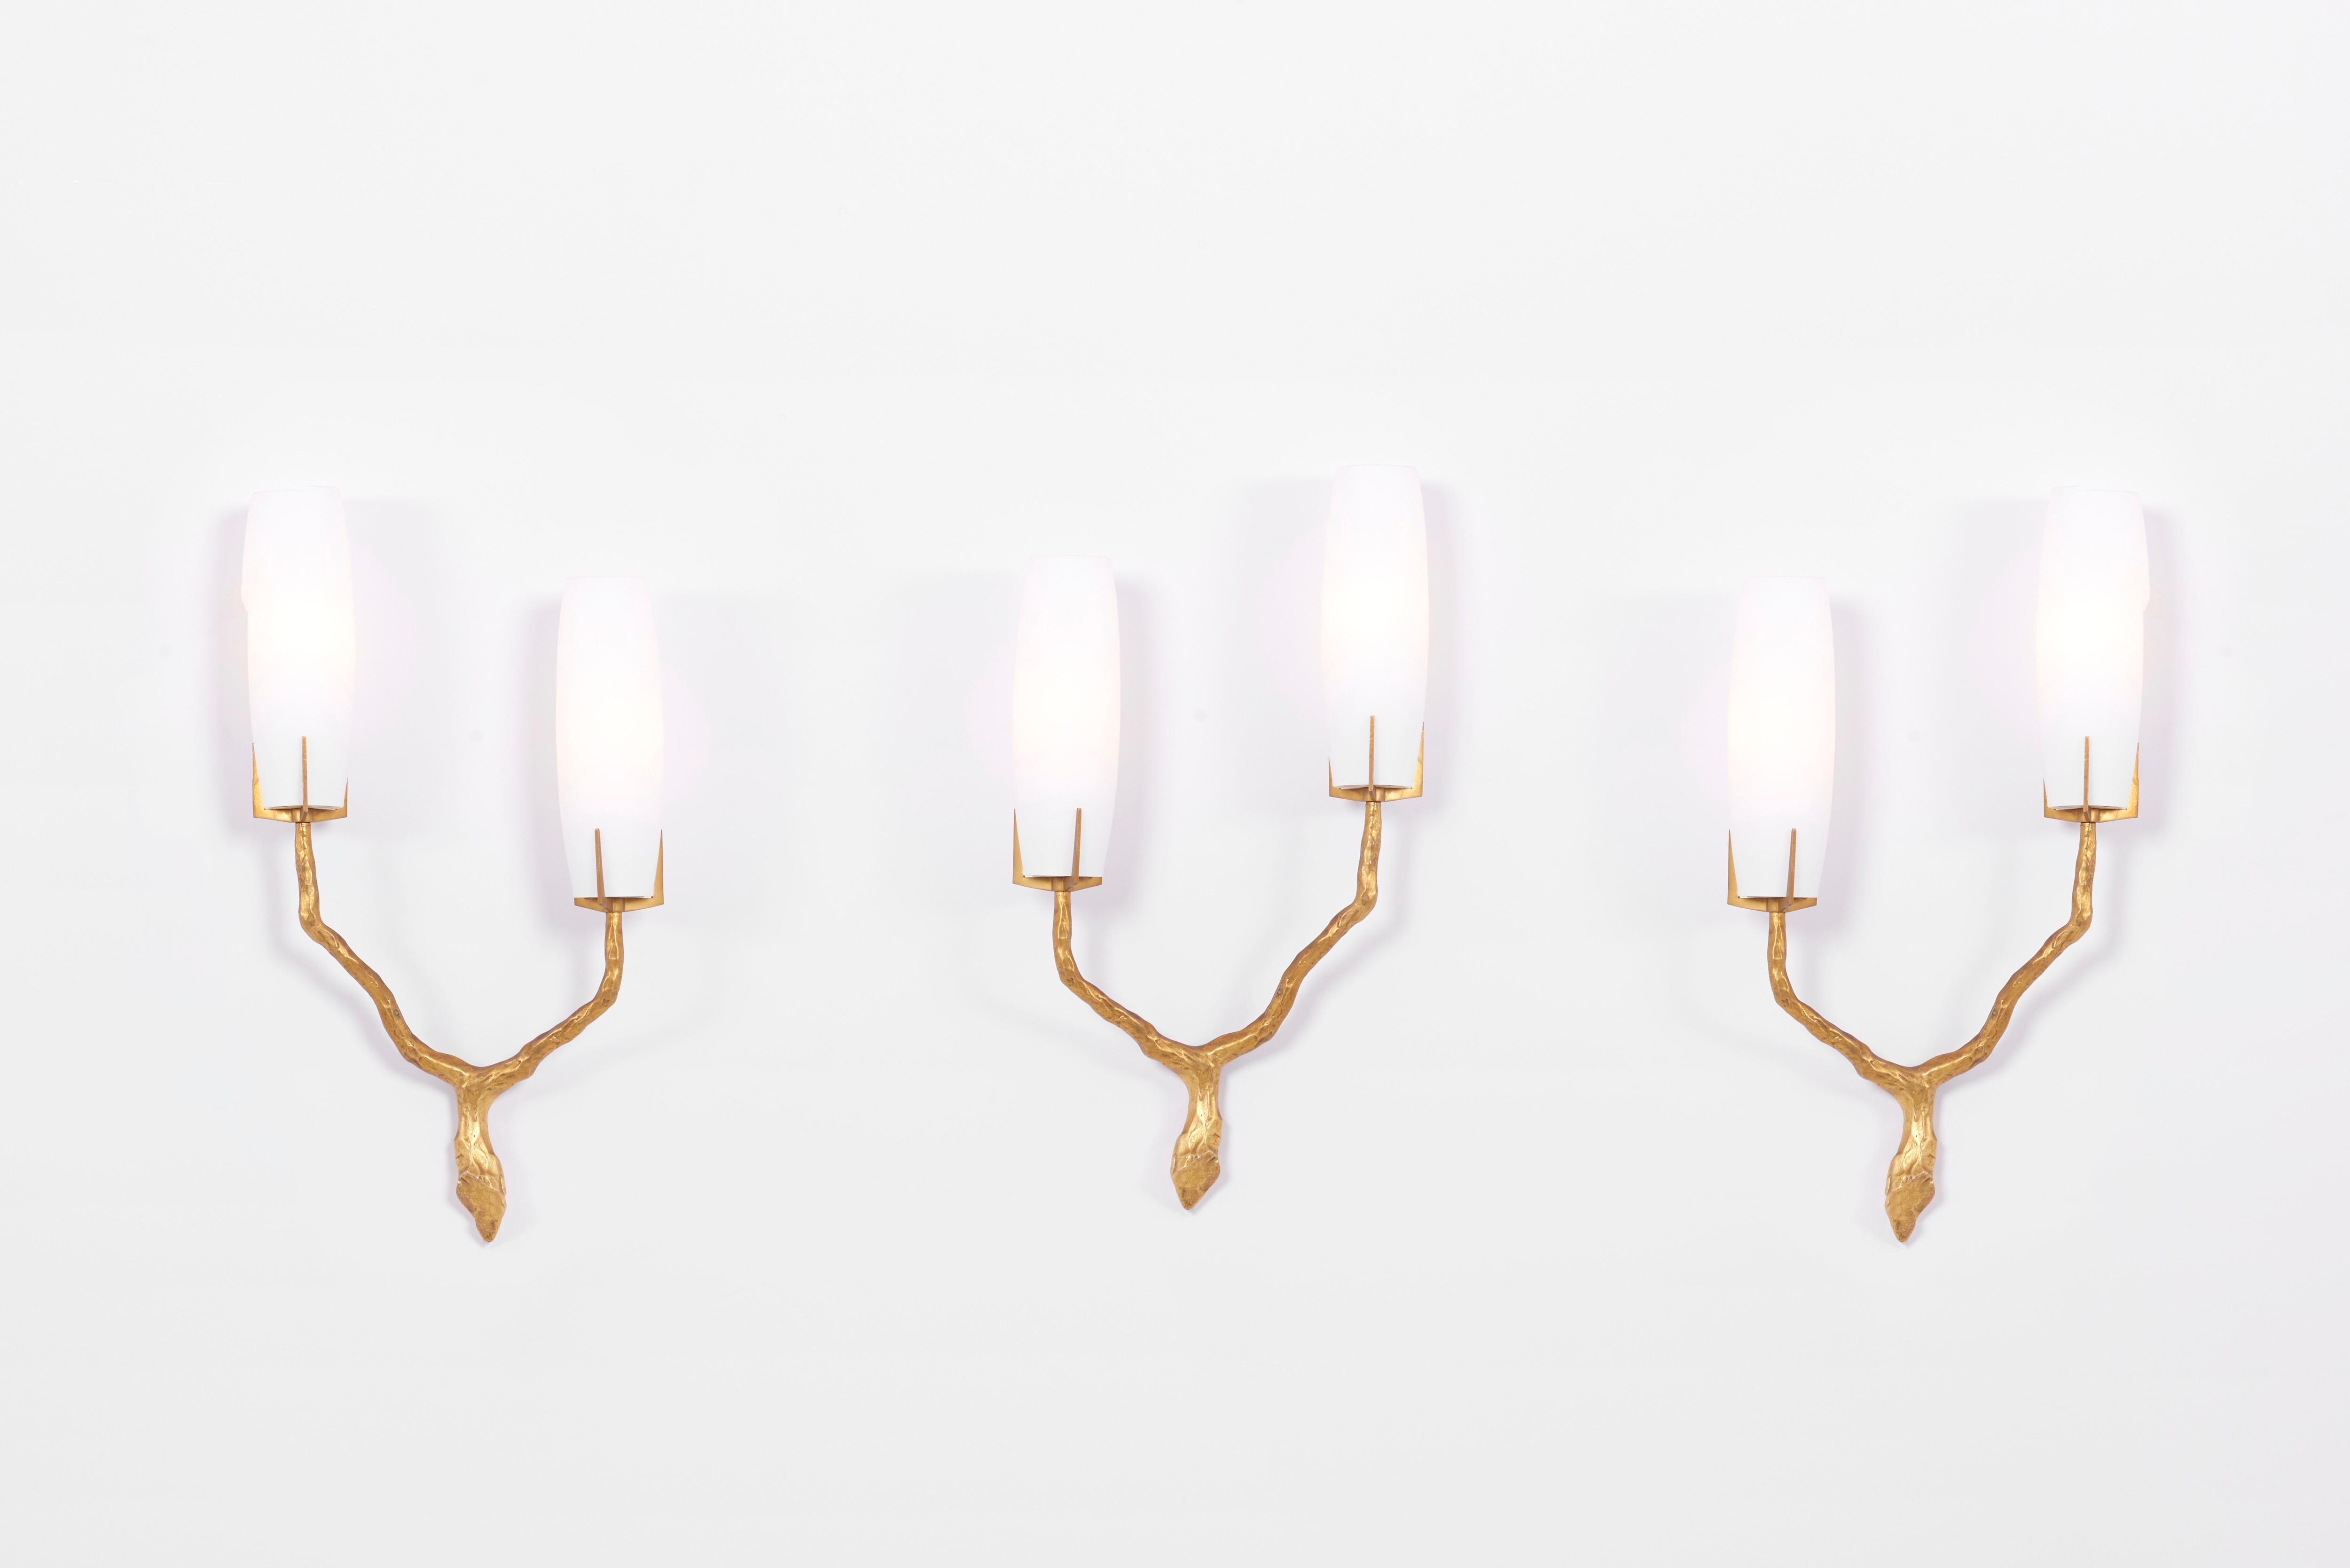 Stunning set of three cast gilt bronze wall appliqués with silk opaque glass shades. Each with a two-arm branch.
Based on a drawing by Felix Agostini and manufactured by Maison Arlus, France in the 1960s.
Old French bayonet sockets - should be